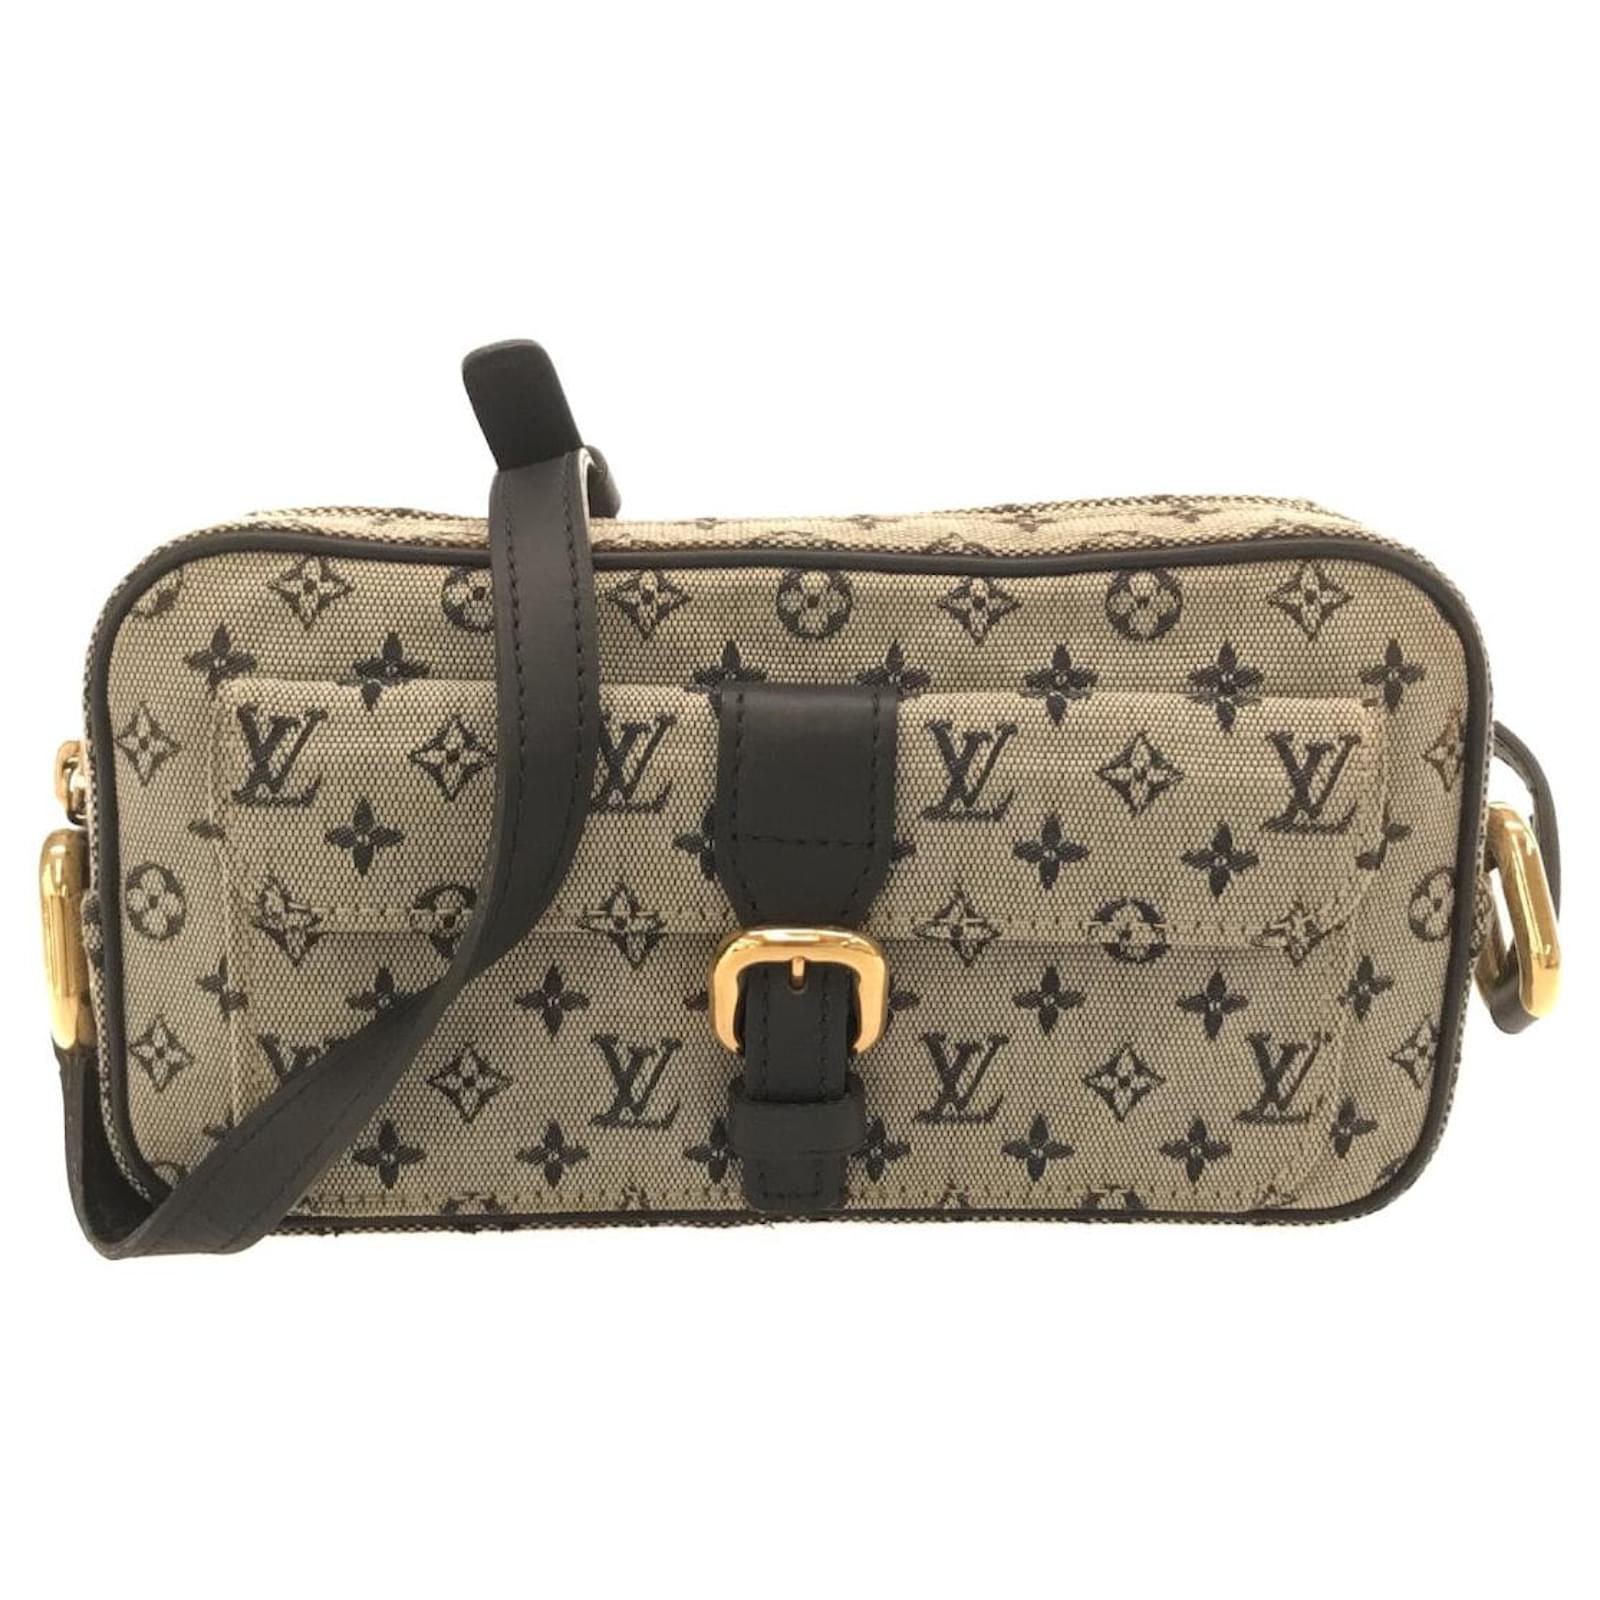 Why don't you like LV (Louis Vuitton) bags? - Quora